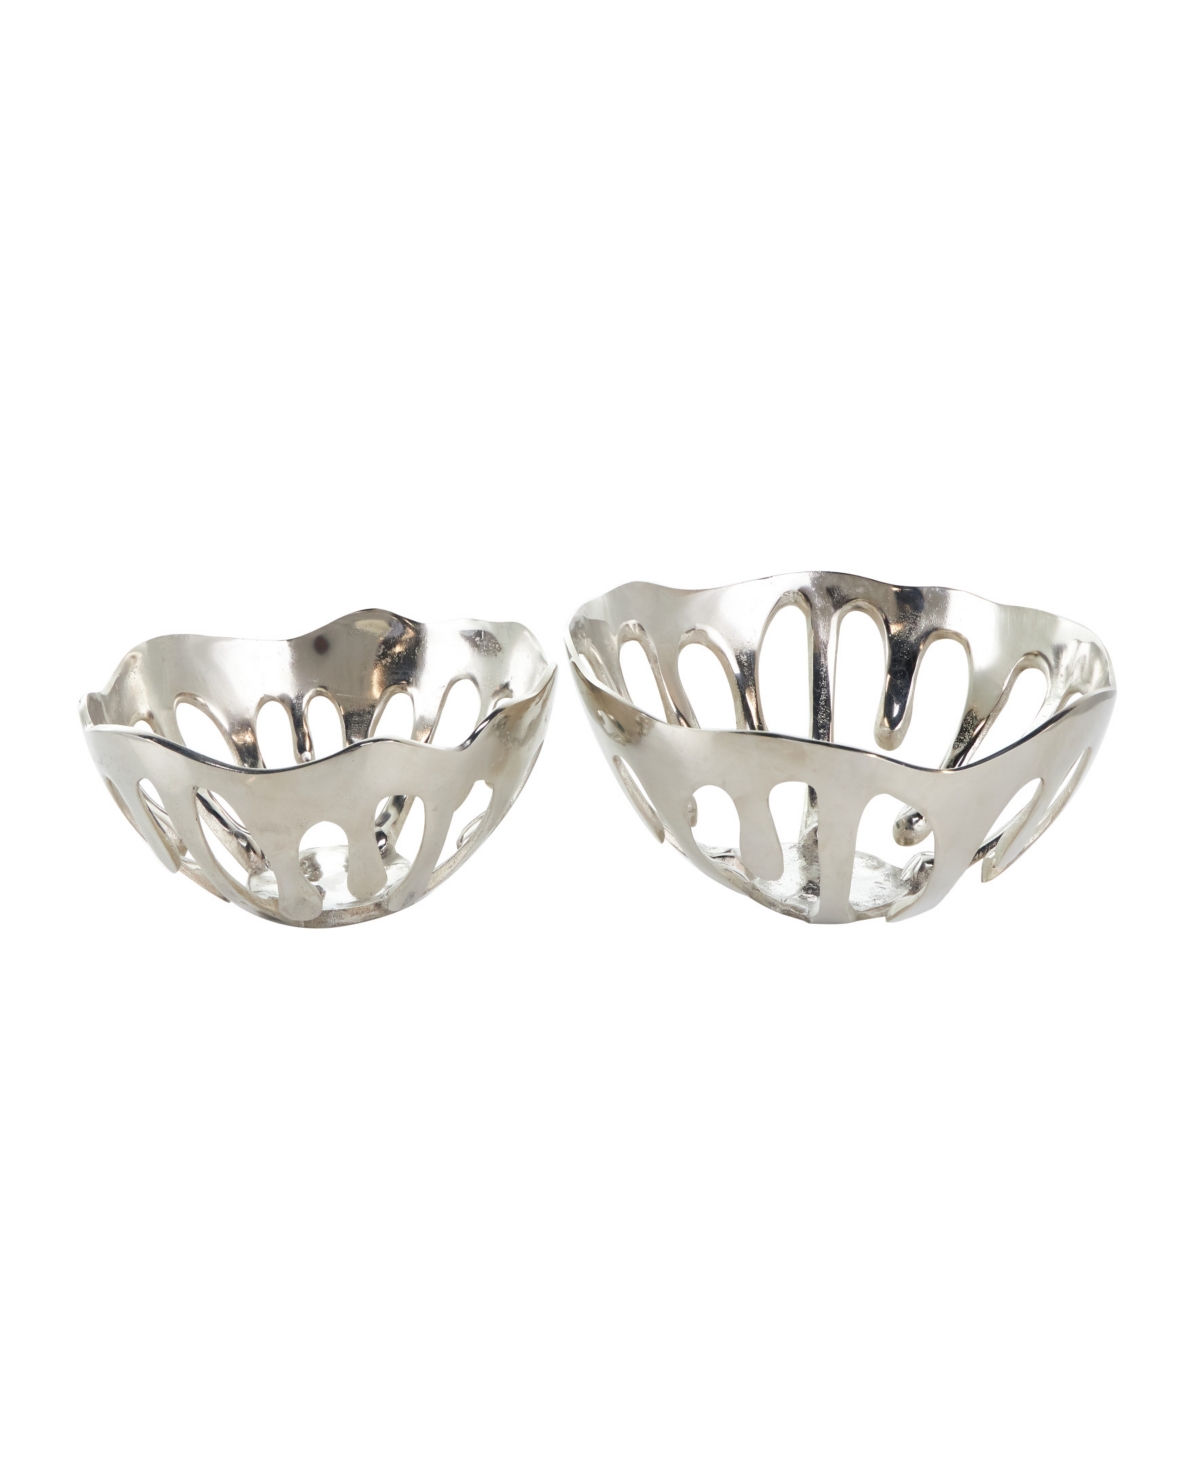 Rosemary Lane Aluminum Drip Decorative Bowl With Melting Designed Body, Set Of 2 In Silver